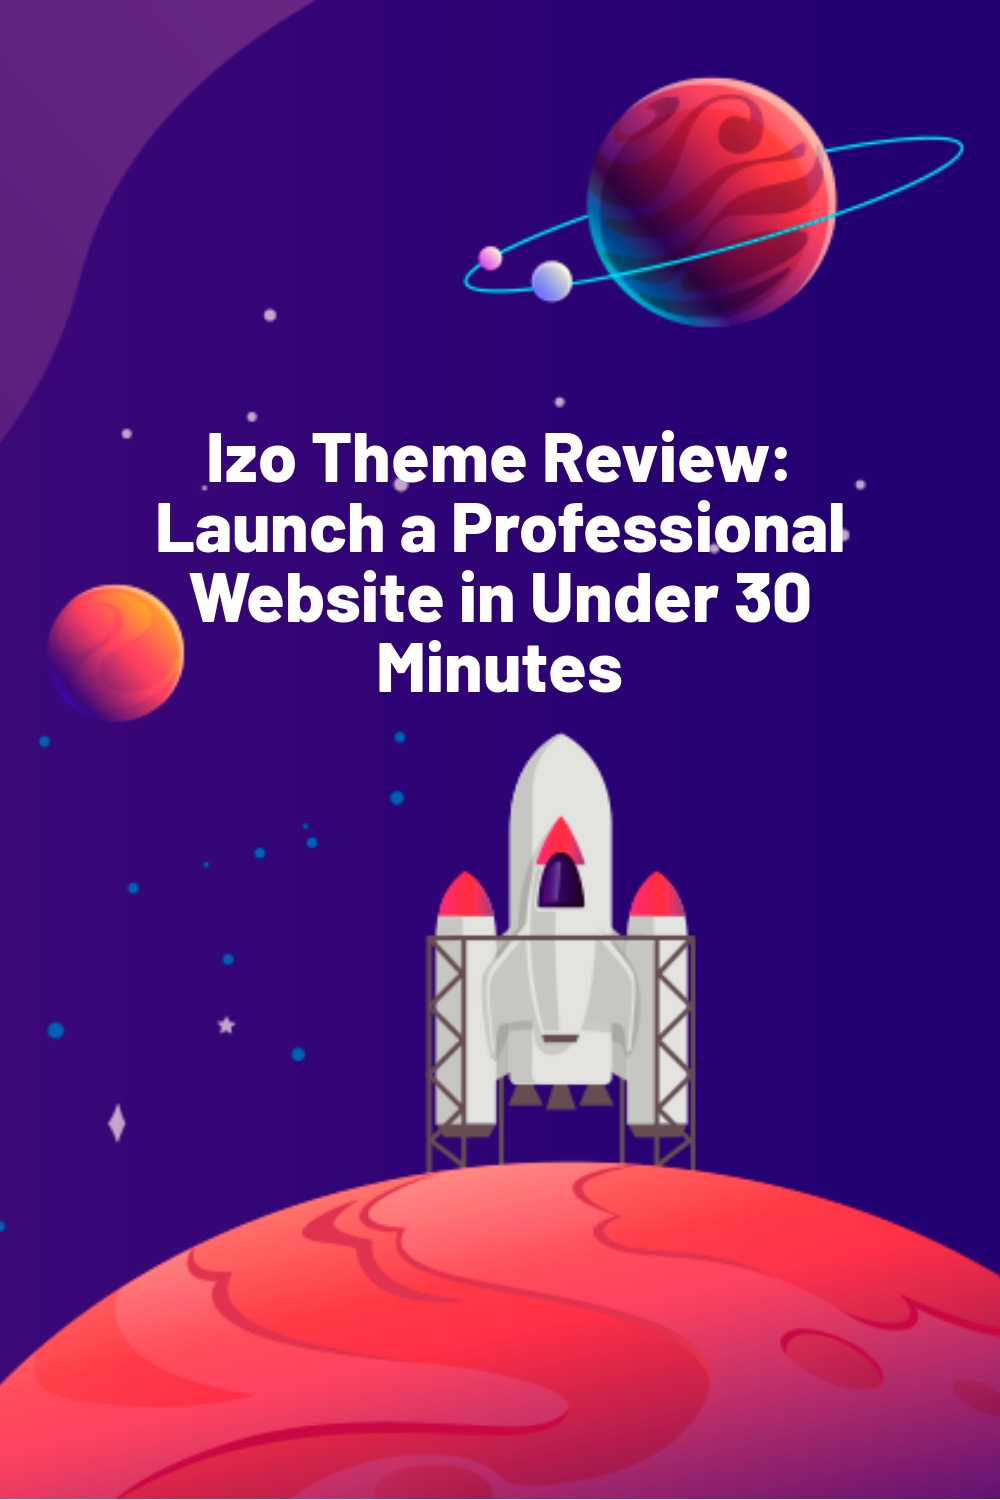 Izo Theme Review: Launch a Professional Website in Under 30 Minutes